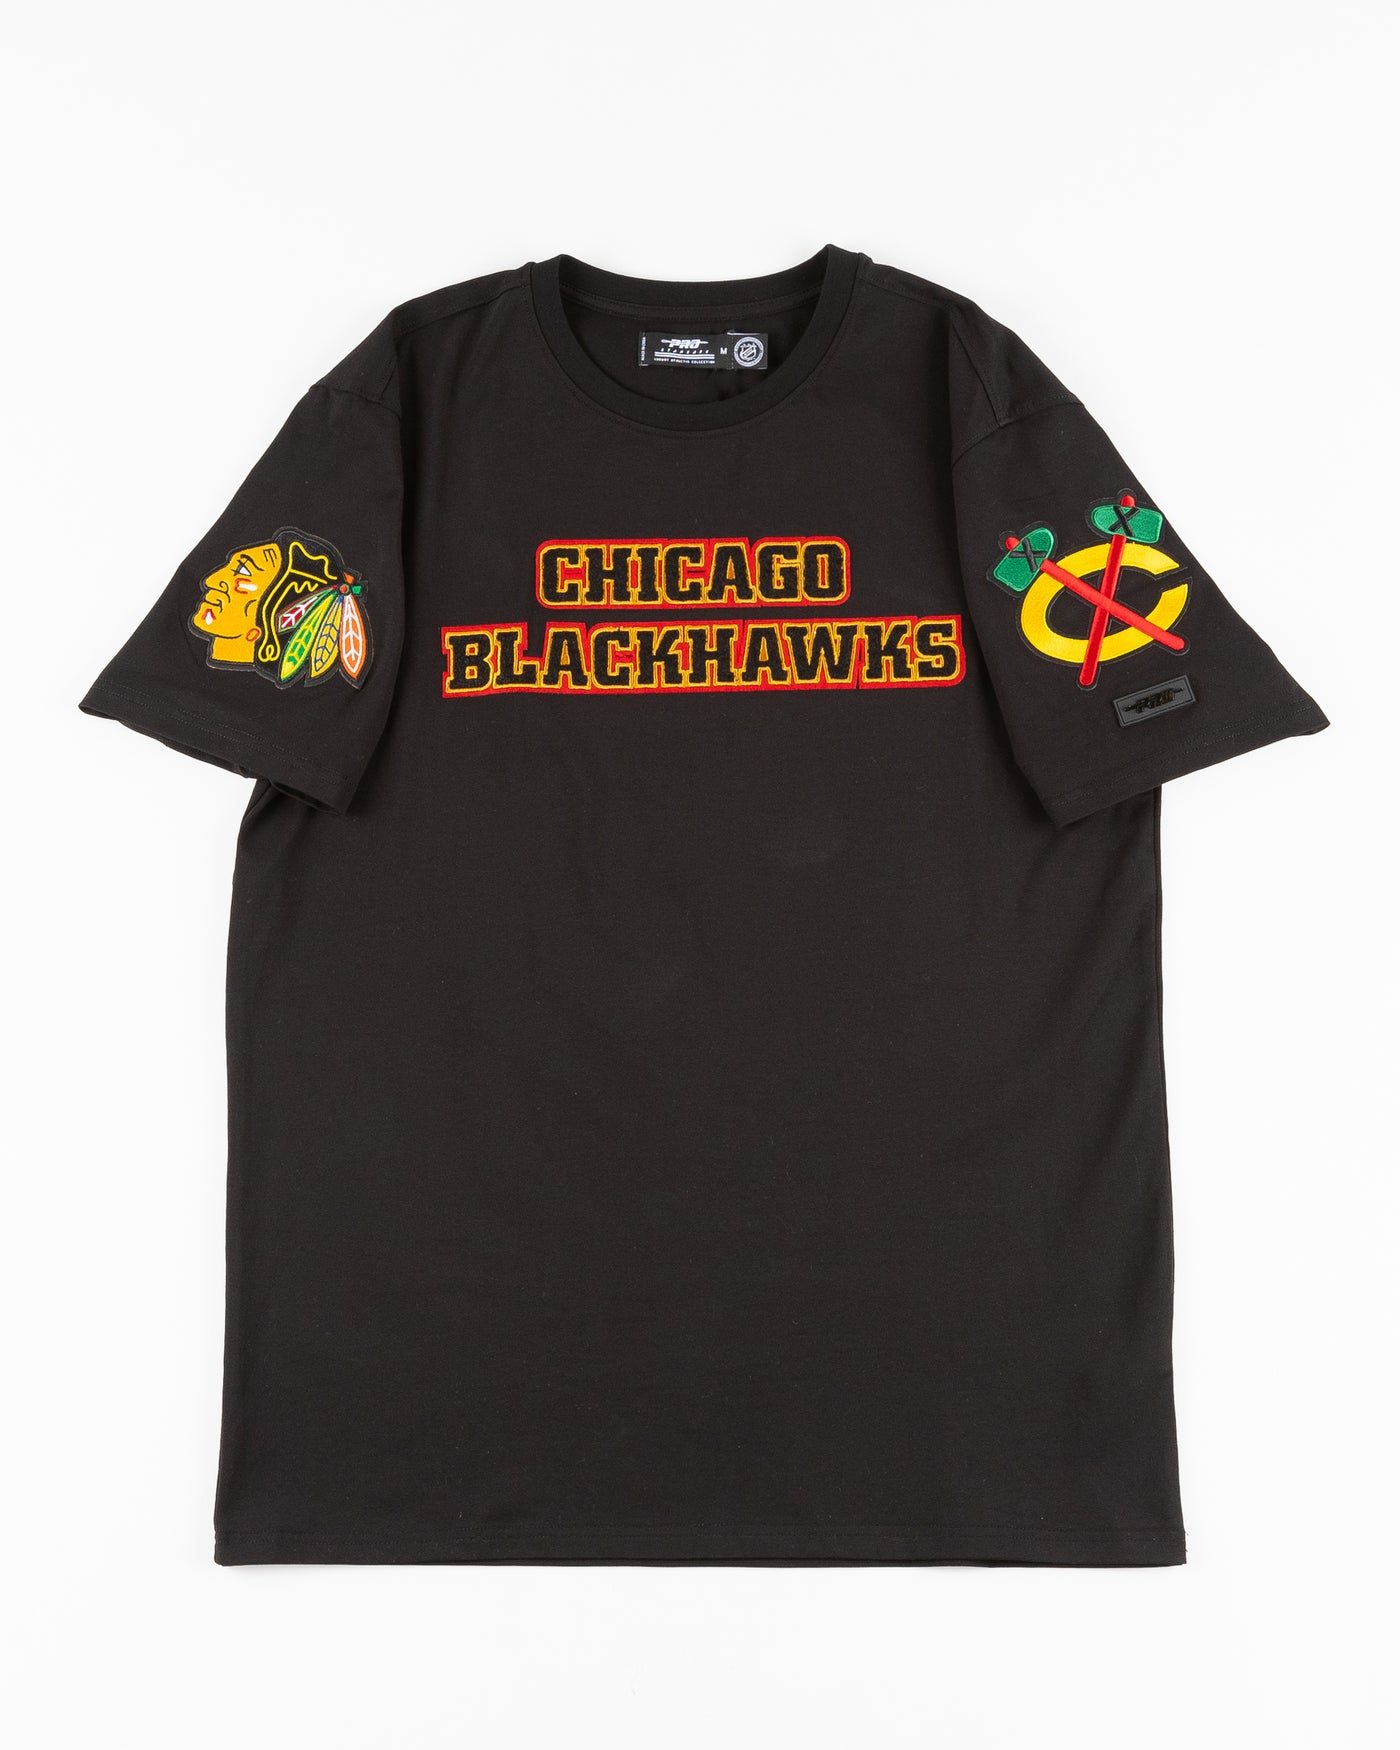 black Pro Standard tee with embroidered Chicago Blackhawks detailing on front and shoulders - front lay flat